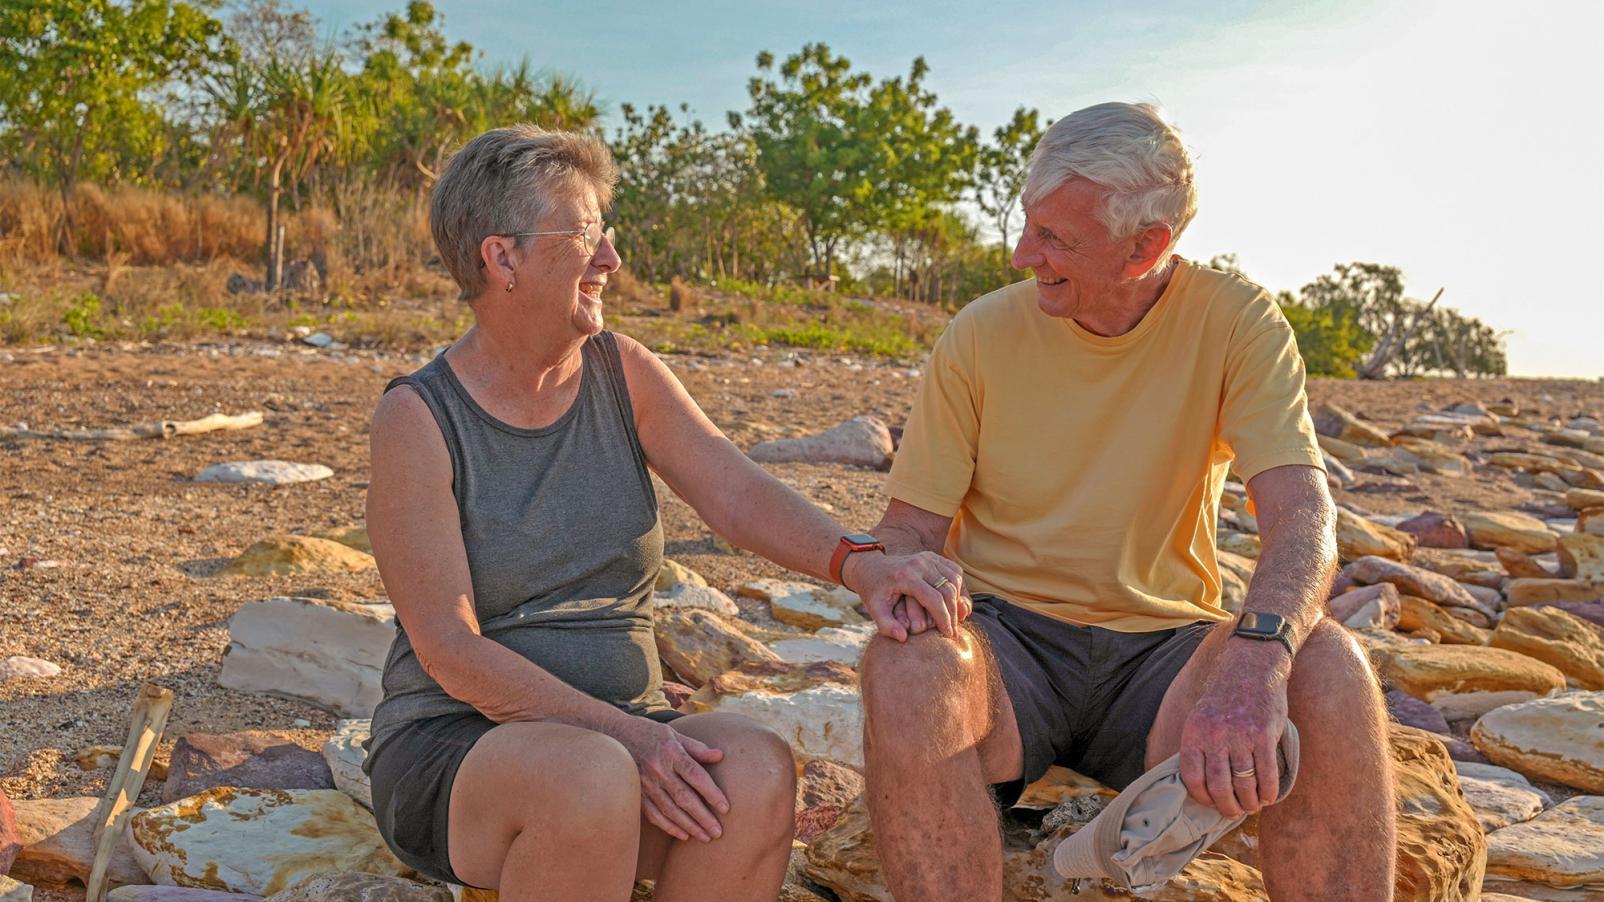 A male and female sitting on a rock in rural Australia smiling at each other